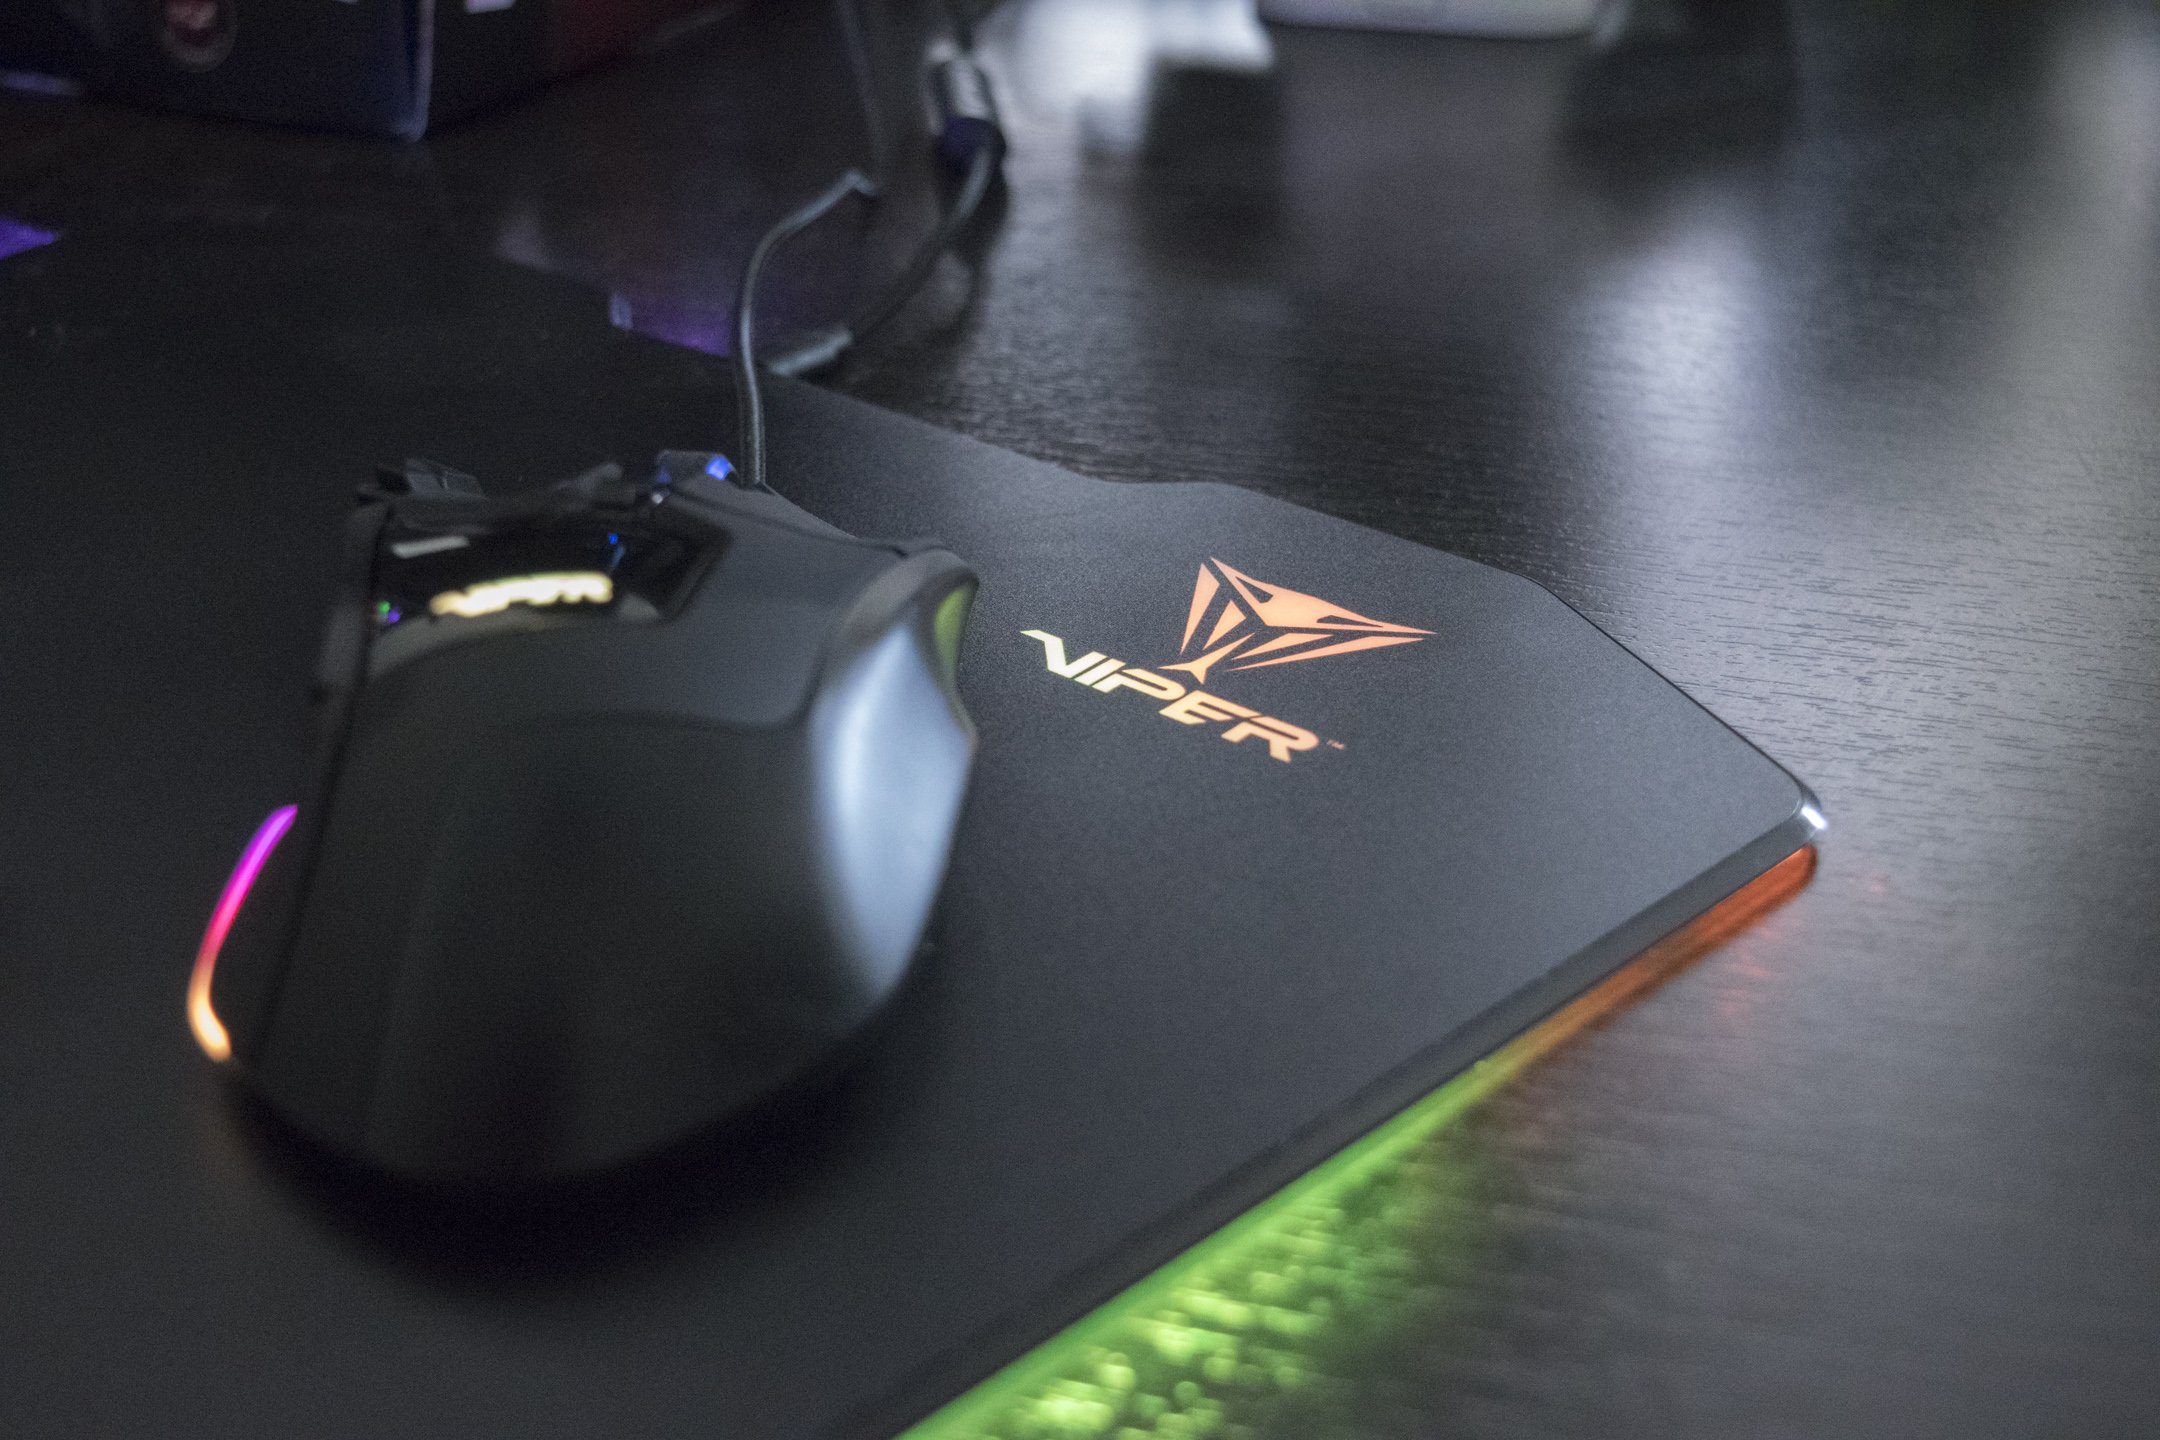 Best Gaming Mouse 2020 - Viper Gaming V570 Blackout Edition